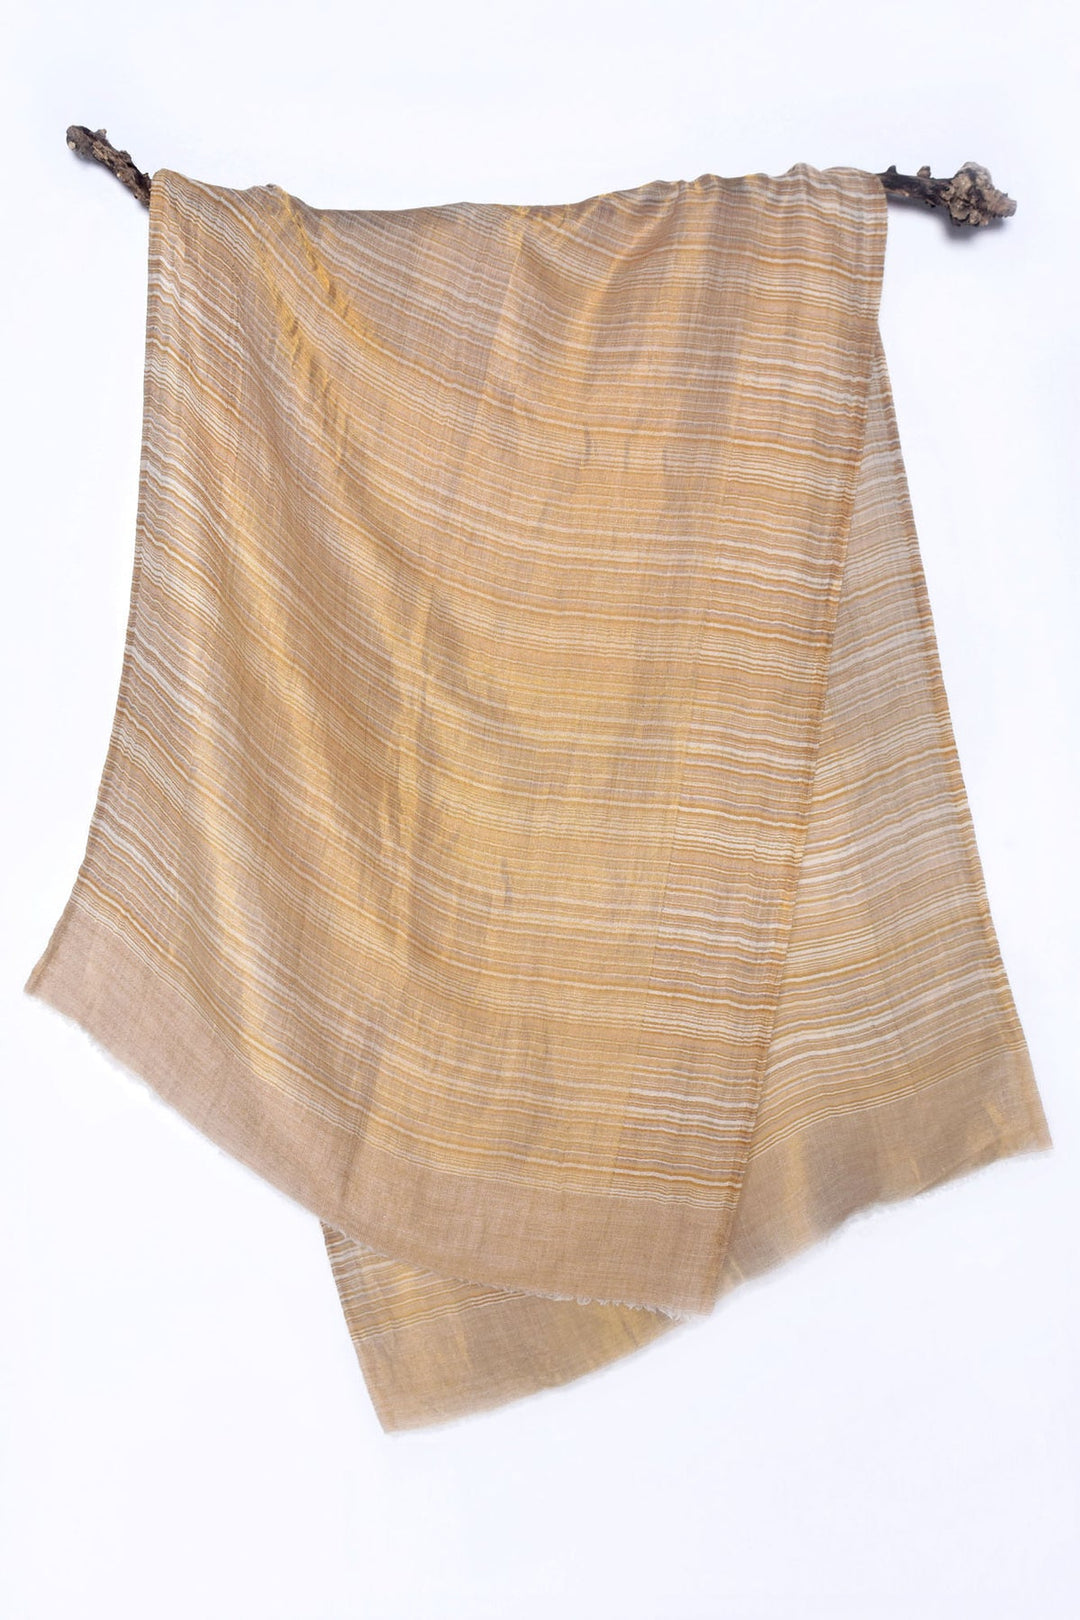 Soft Cashmere Stole with Zaree Border - Dry Clean Only | Davy Soft Cashmere Stole - Gold